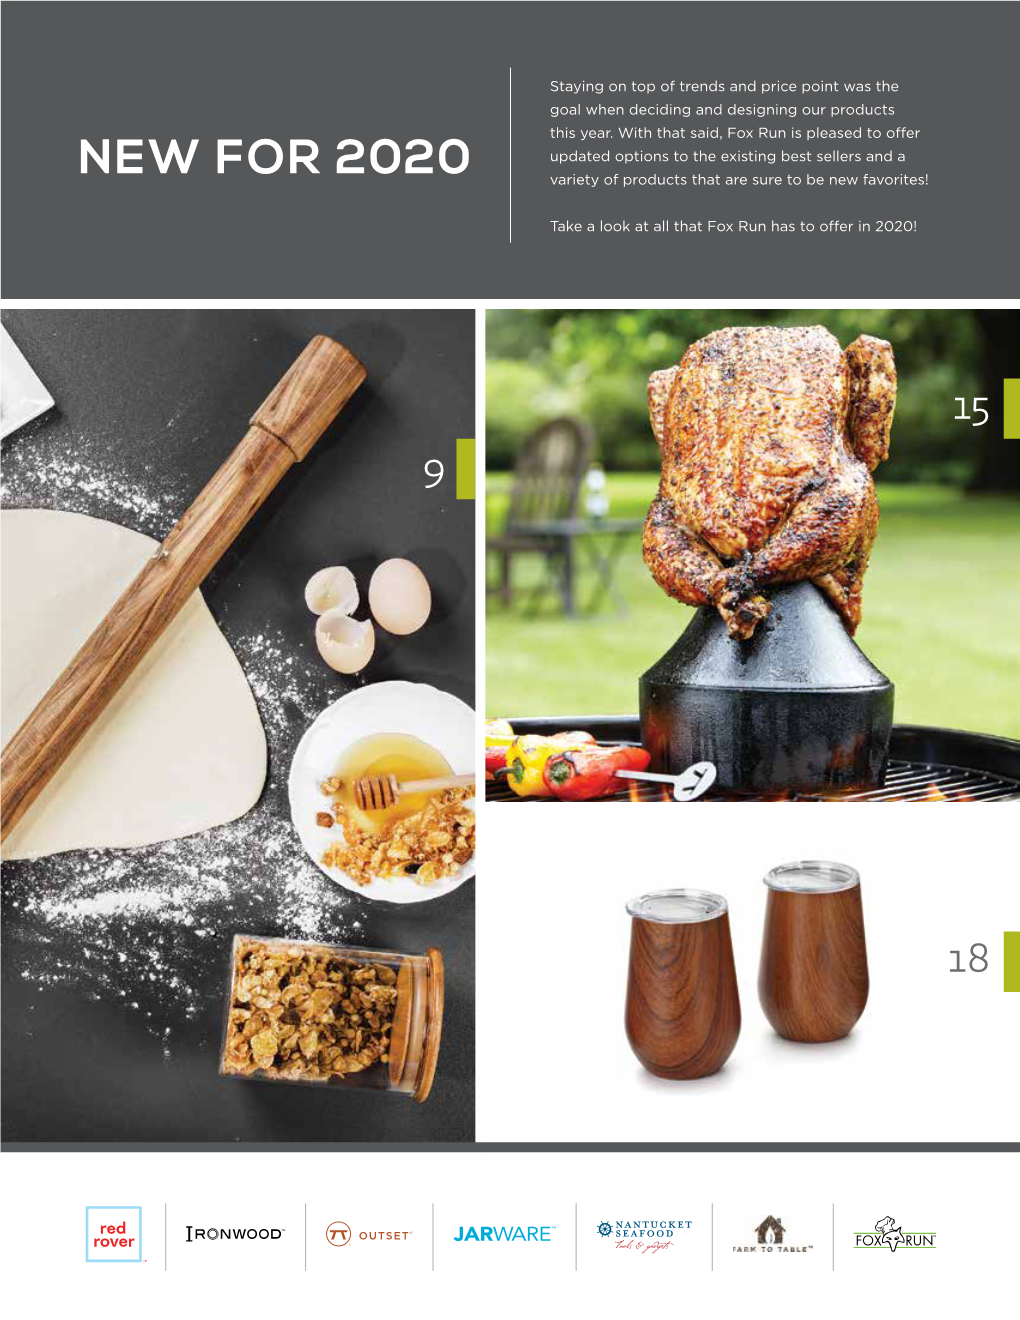 NEW for 2020 Variety of Products That Are Sure to Be New Favorites!